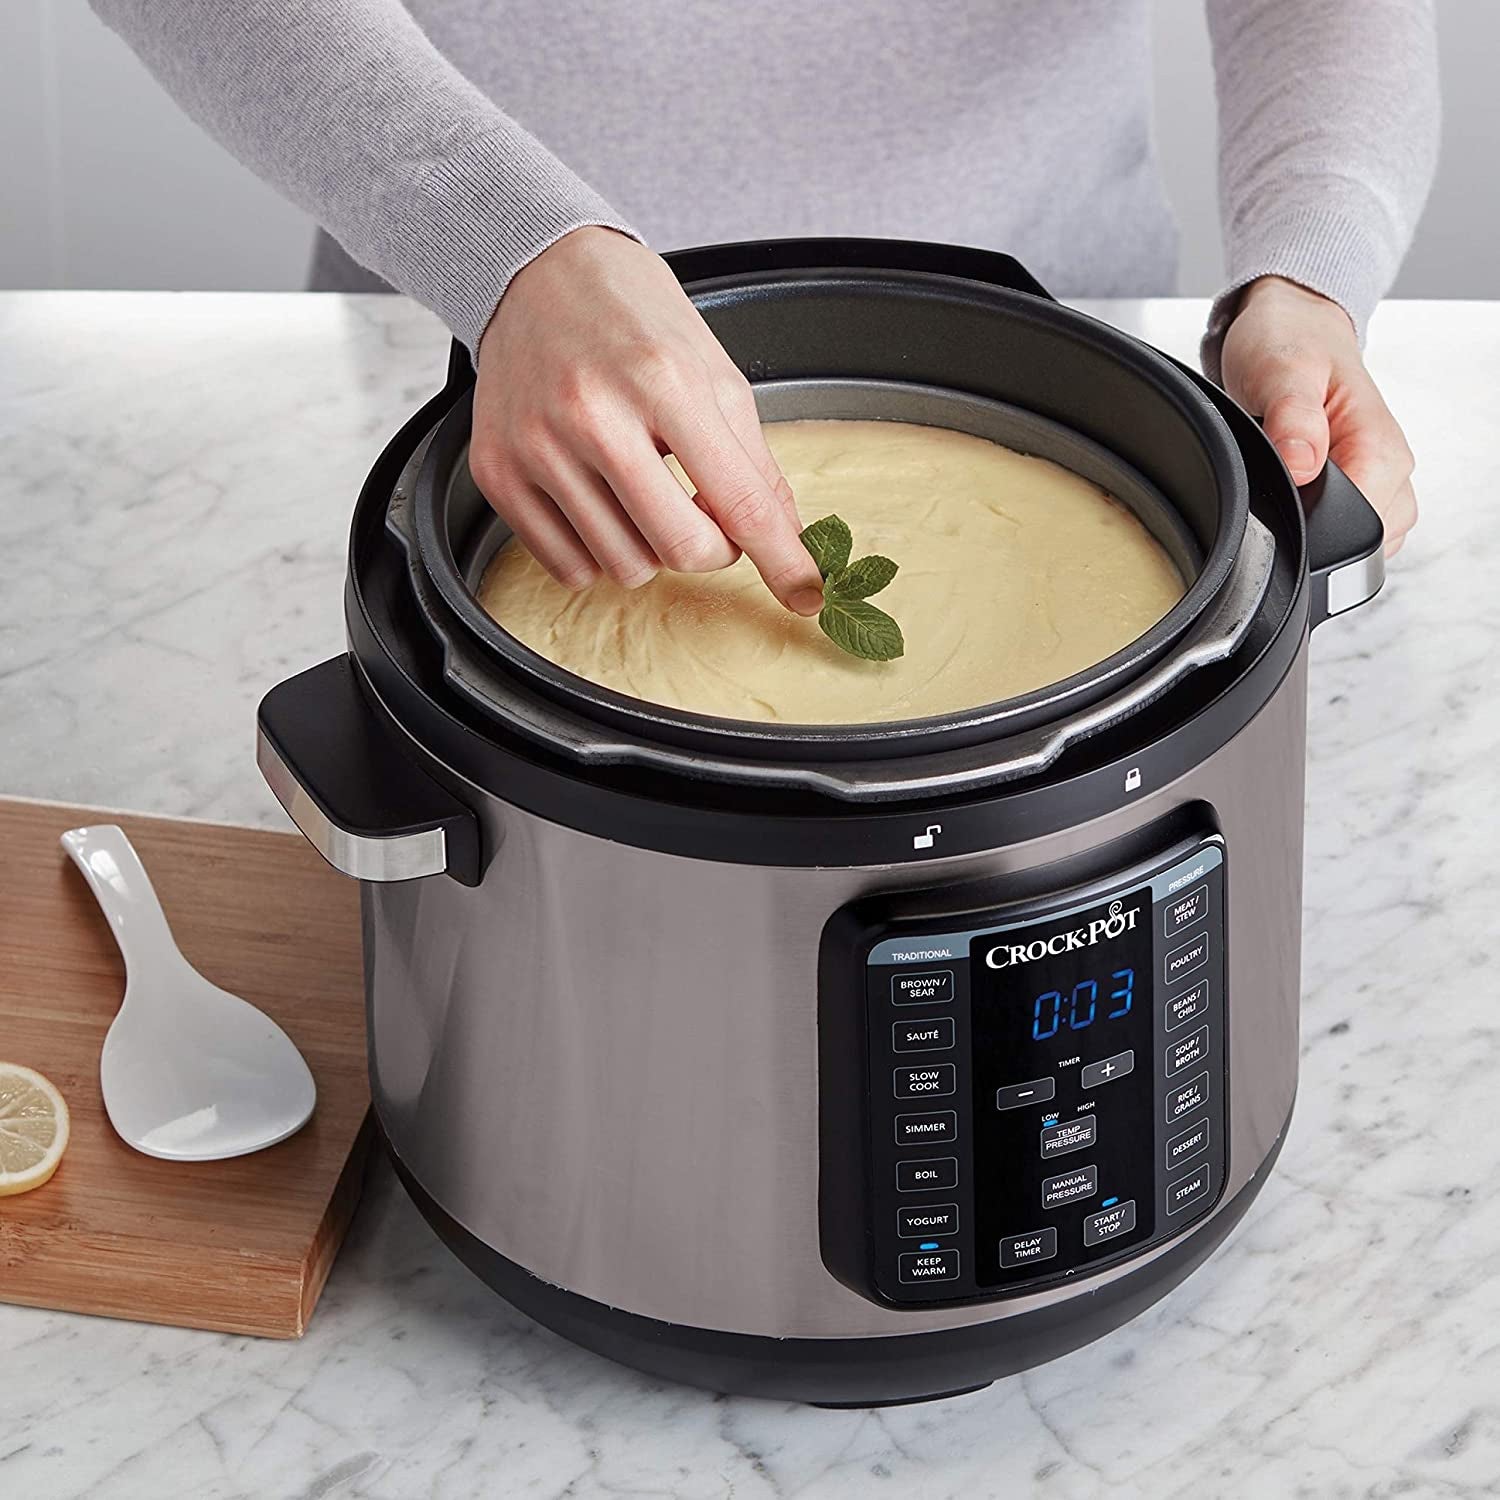 Crock-pot 8-Quart Multi-Use XL Express Crock Programmable Slow Cooker with Manual Pressure, Boil & Simmer, 8qt, Stainless Steel